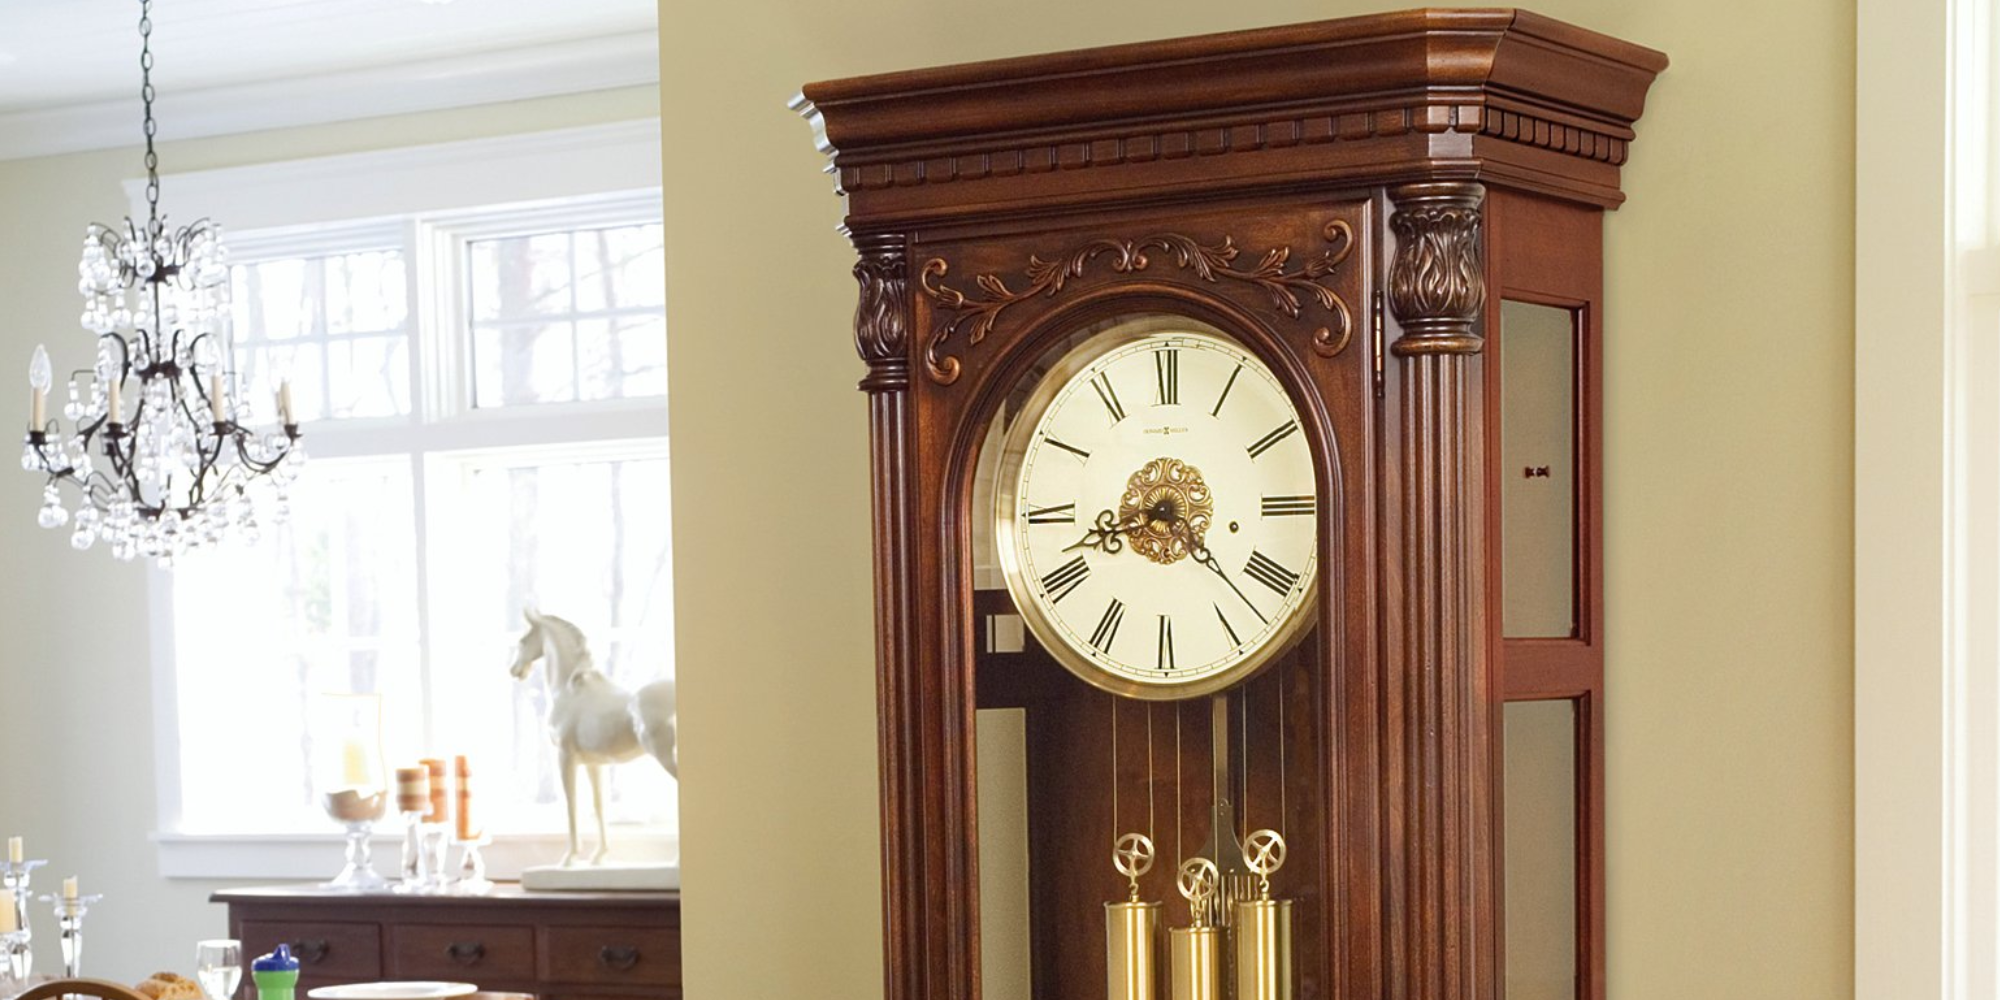 What Are Grandfather Clocks Made Of - Premier Clocks